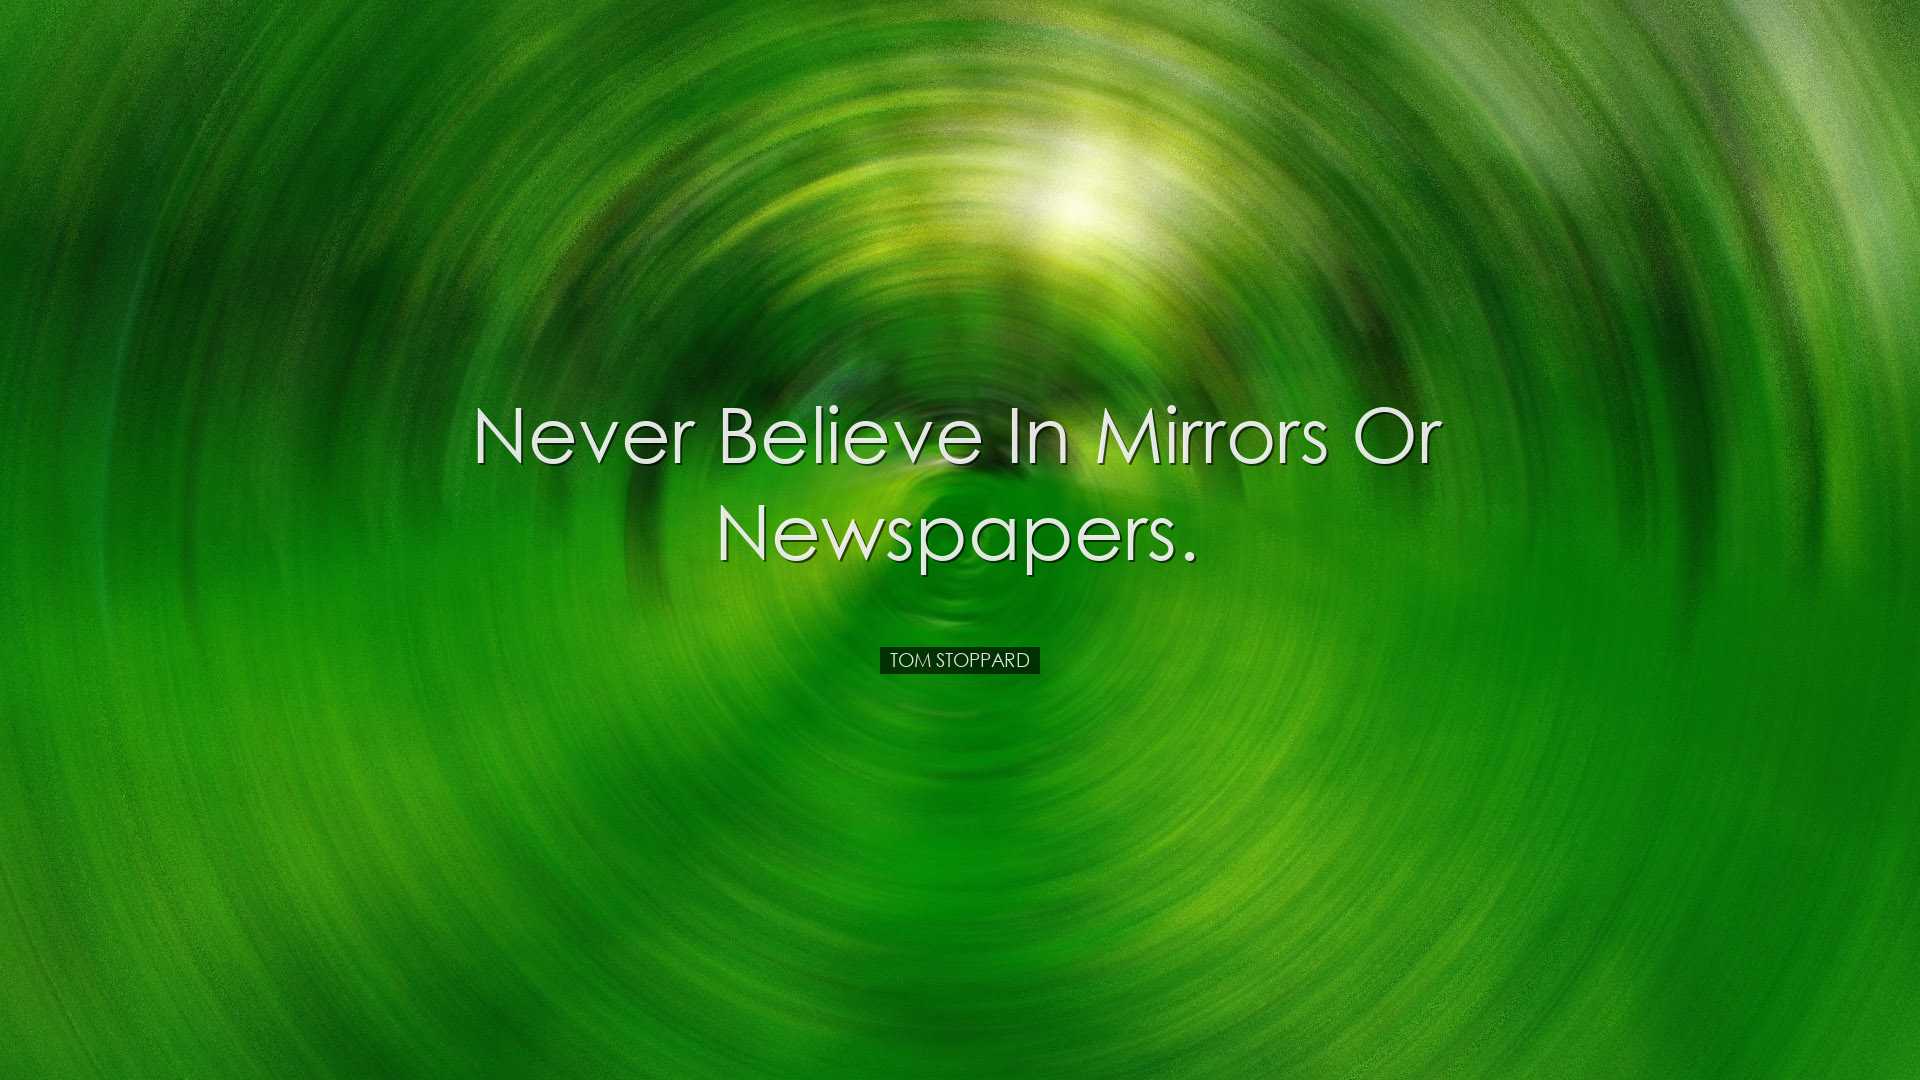 Never believe in mirrors or newspapers. - Tom Stoppard